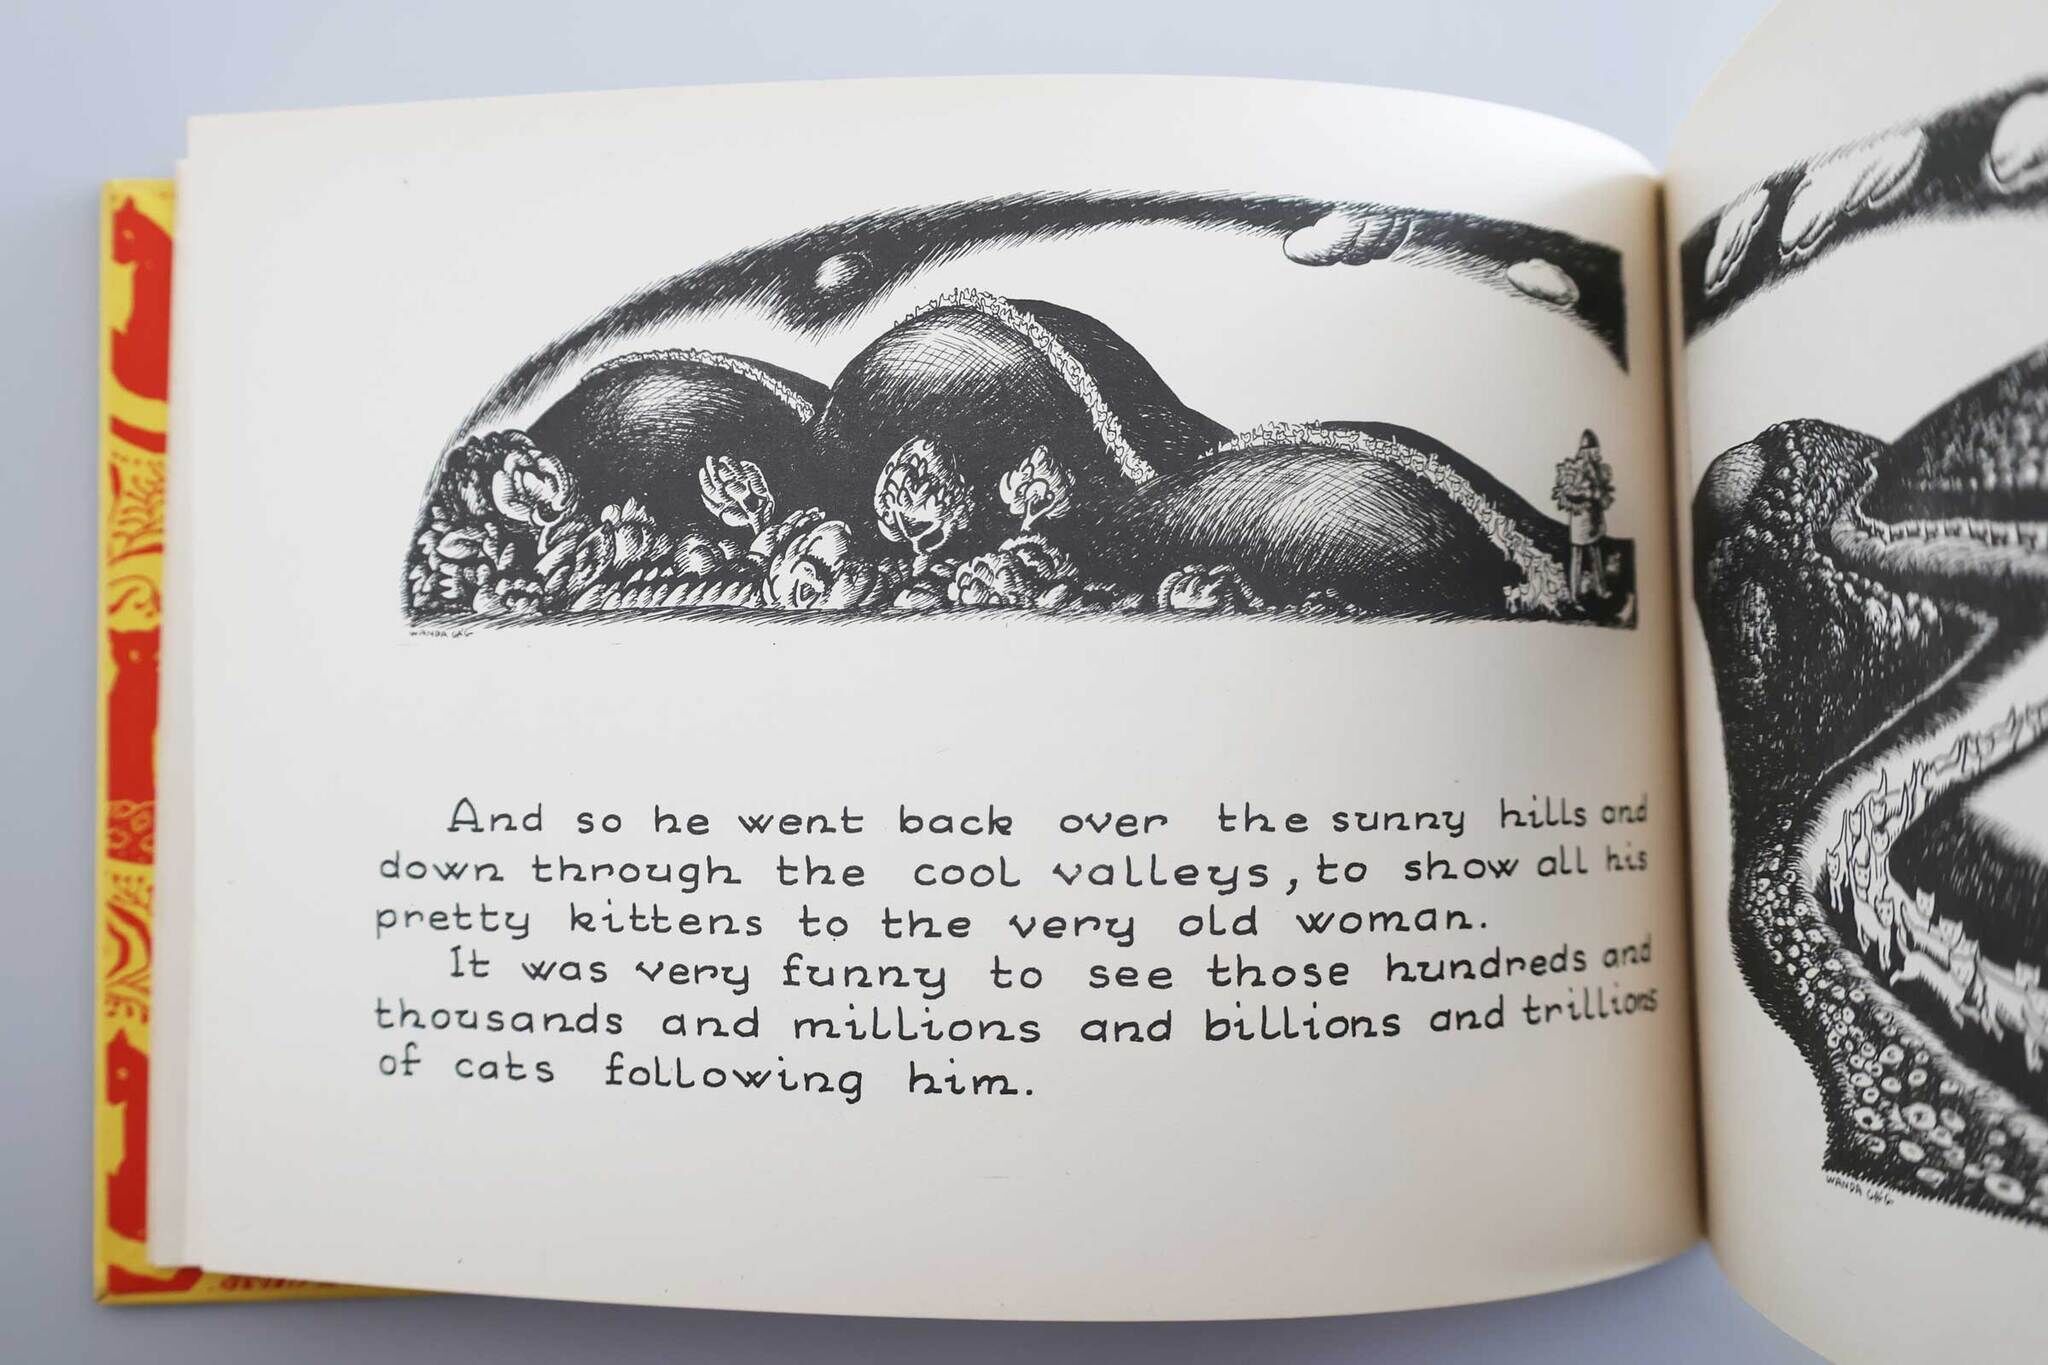 Open book with an illustration of a hill covered in cats and text describing a journey to show kittens to an old woman.